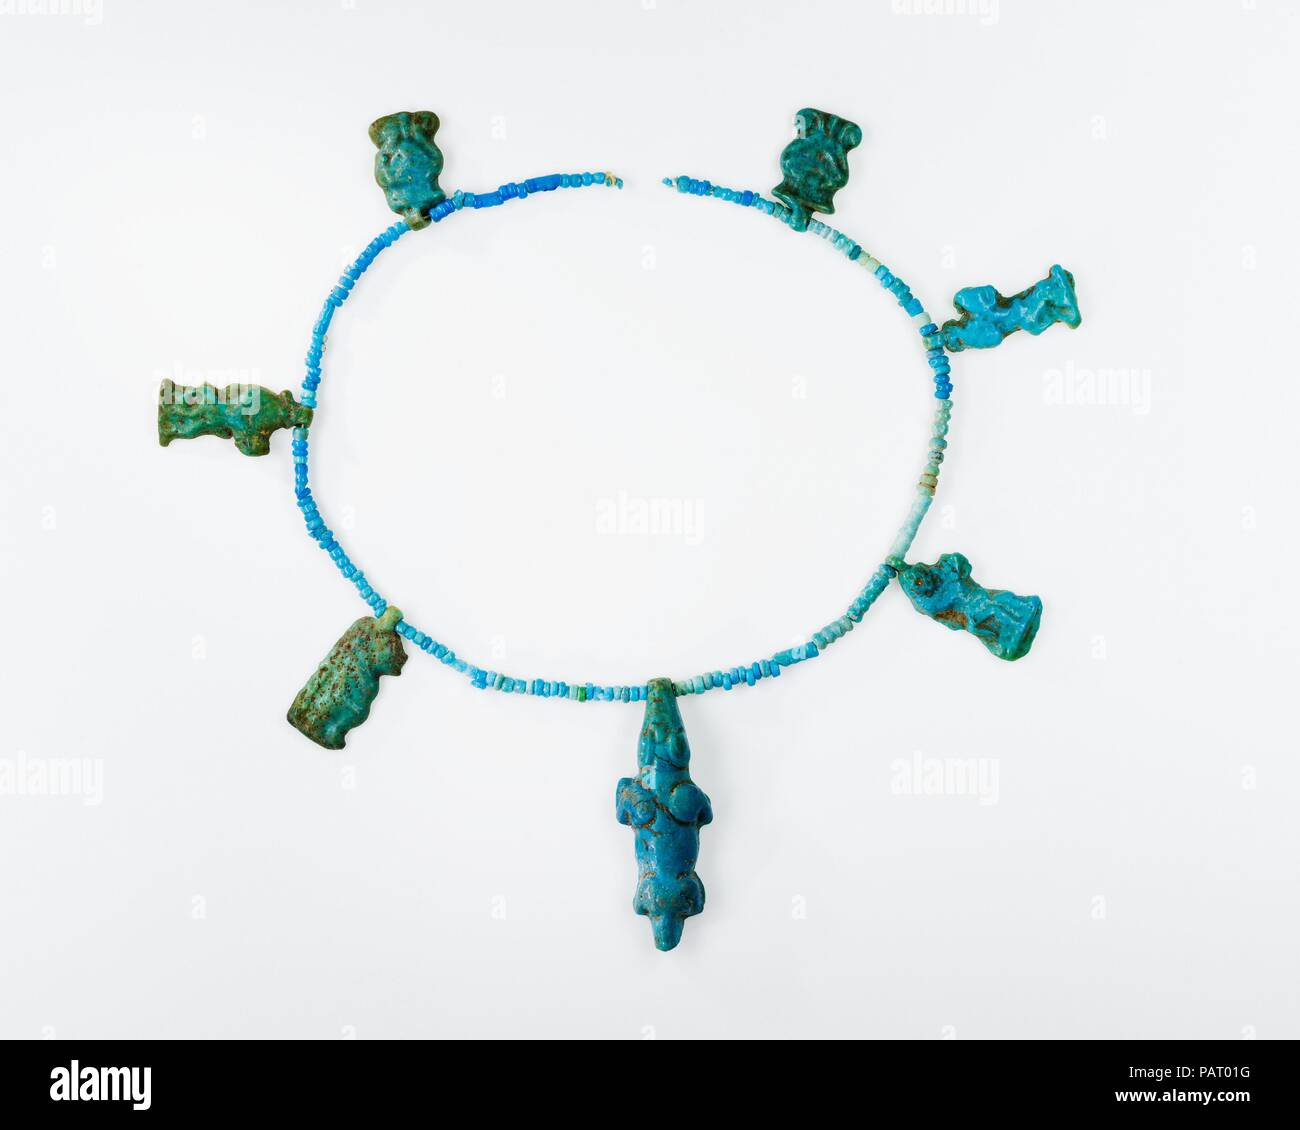 Seven Amulets on a String of Beads. Dimensions: L. of strand 19.5 cm (7 1/2 in.); L of crocodile amulet 3 cm (1 3/16 in.). Dynasty: Dynasty 18. Reign: reign of Amenhotep III. Date: ca. 1390-1353 B.C..  These amulets were found together in a pot that was in the same house as the Menat necklace 11.215.450. They were strung together with the small blue beads to keep them together. Museum: Metropolitan Museum of Art, New York, USA. Stock Photo